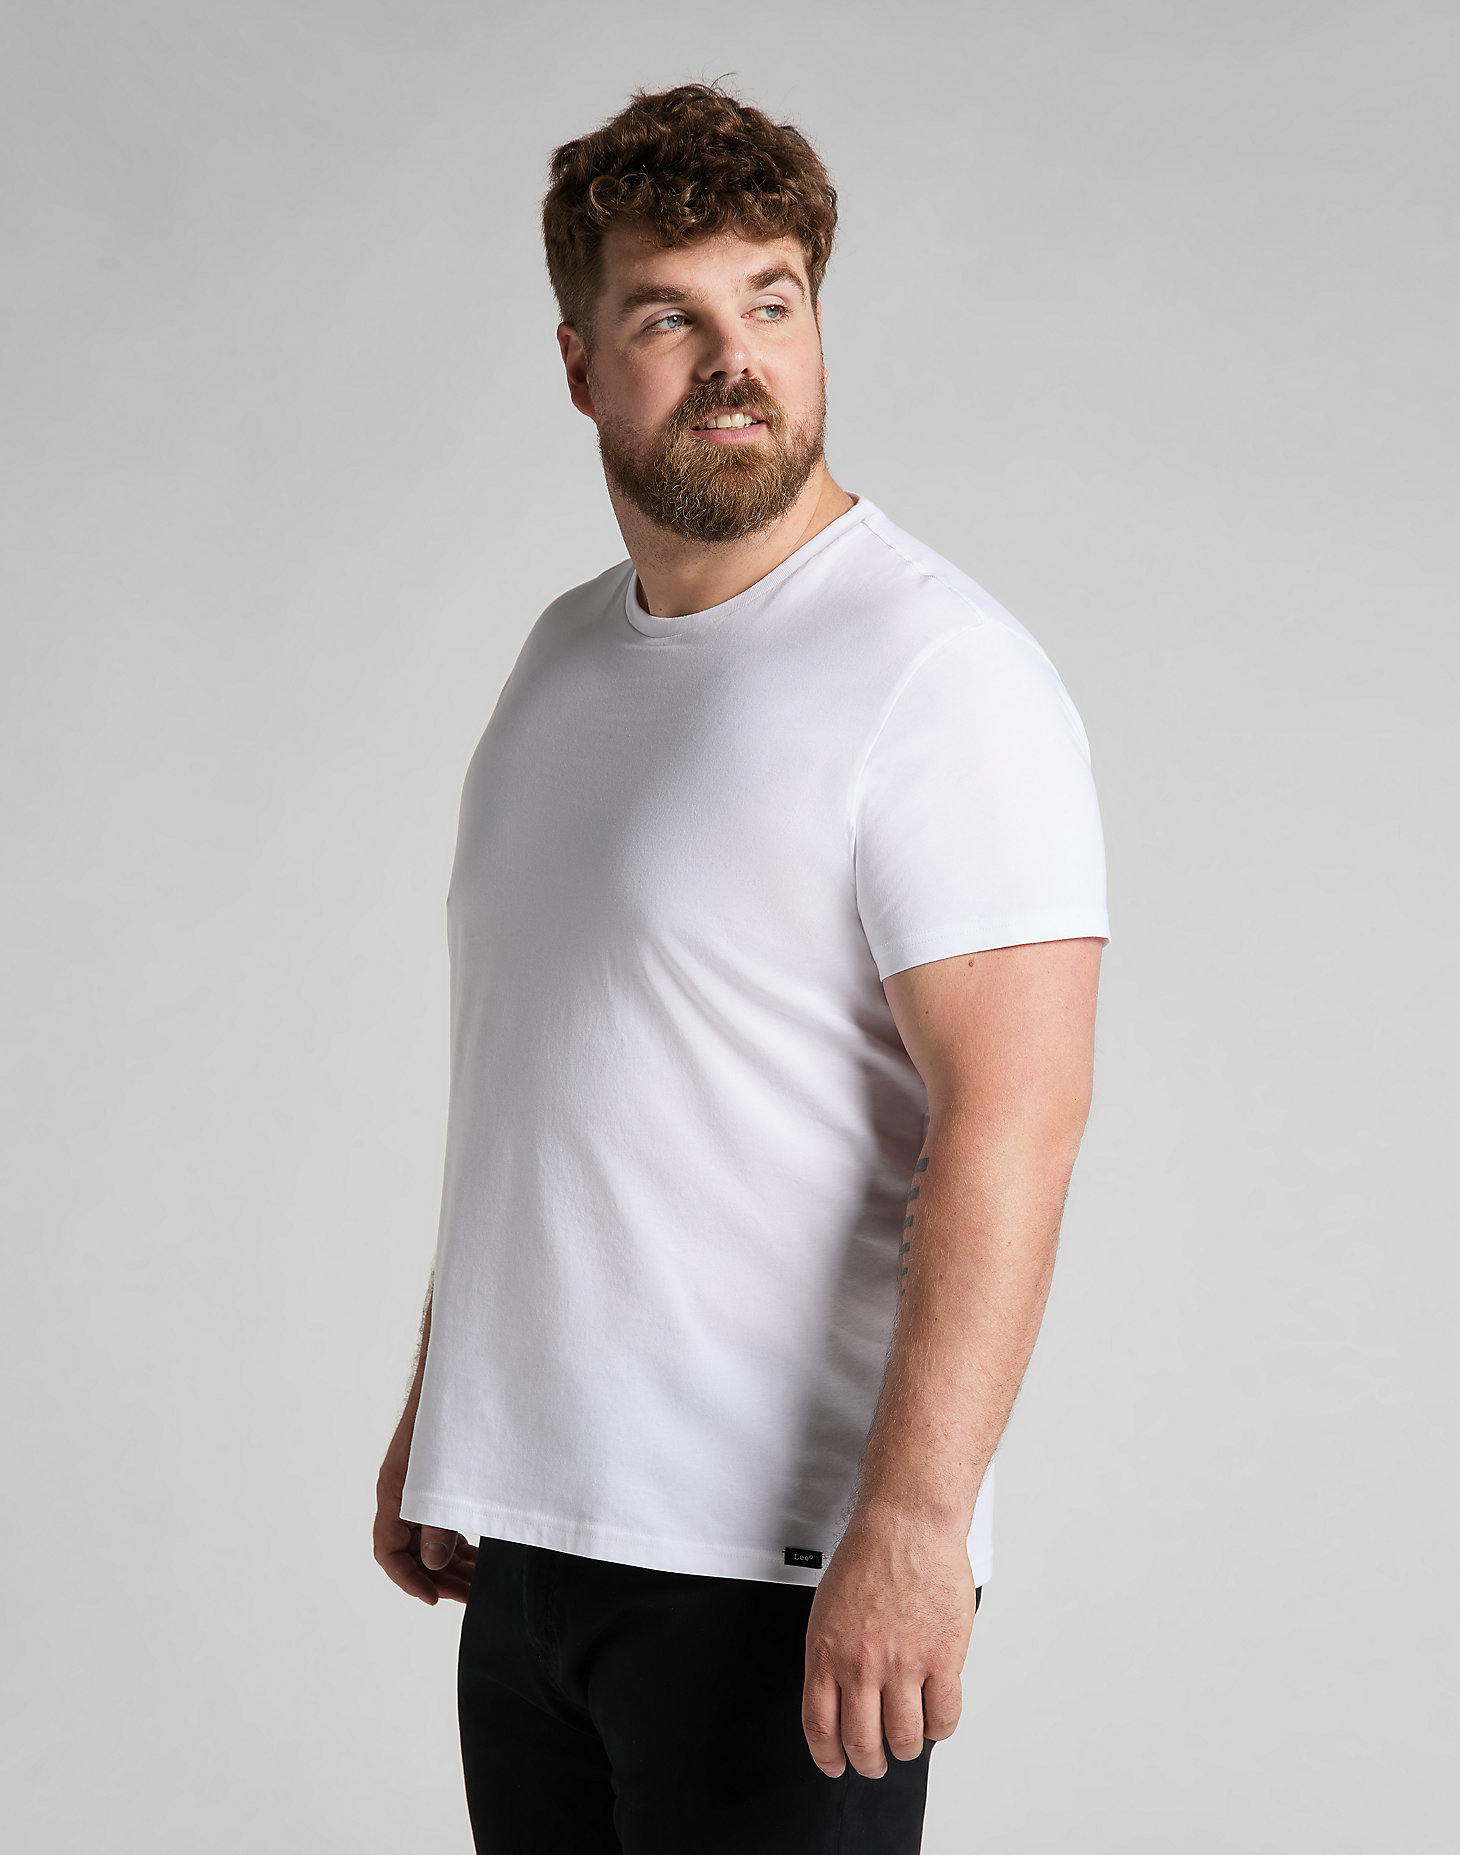 Twin Pack Crew Tee in White alternative view 5